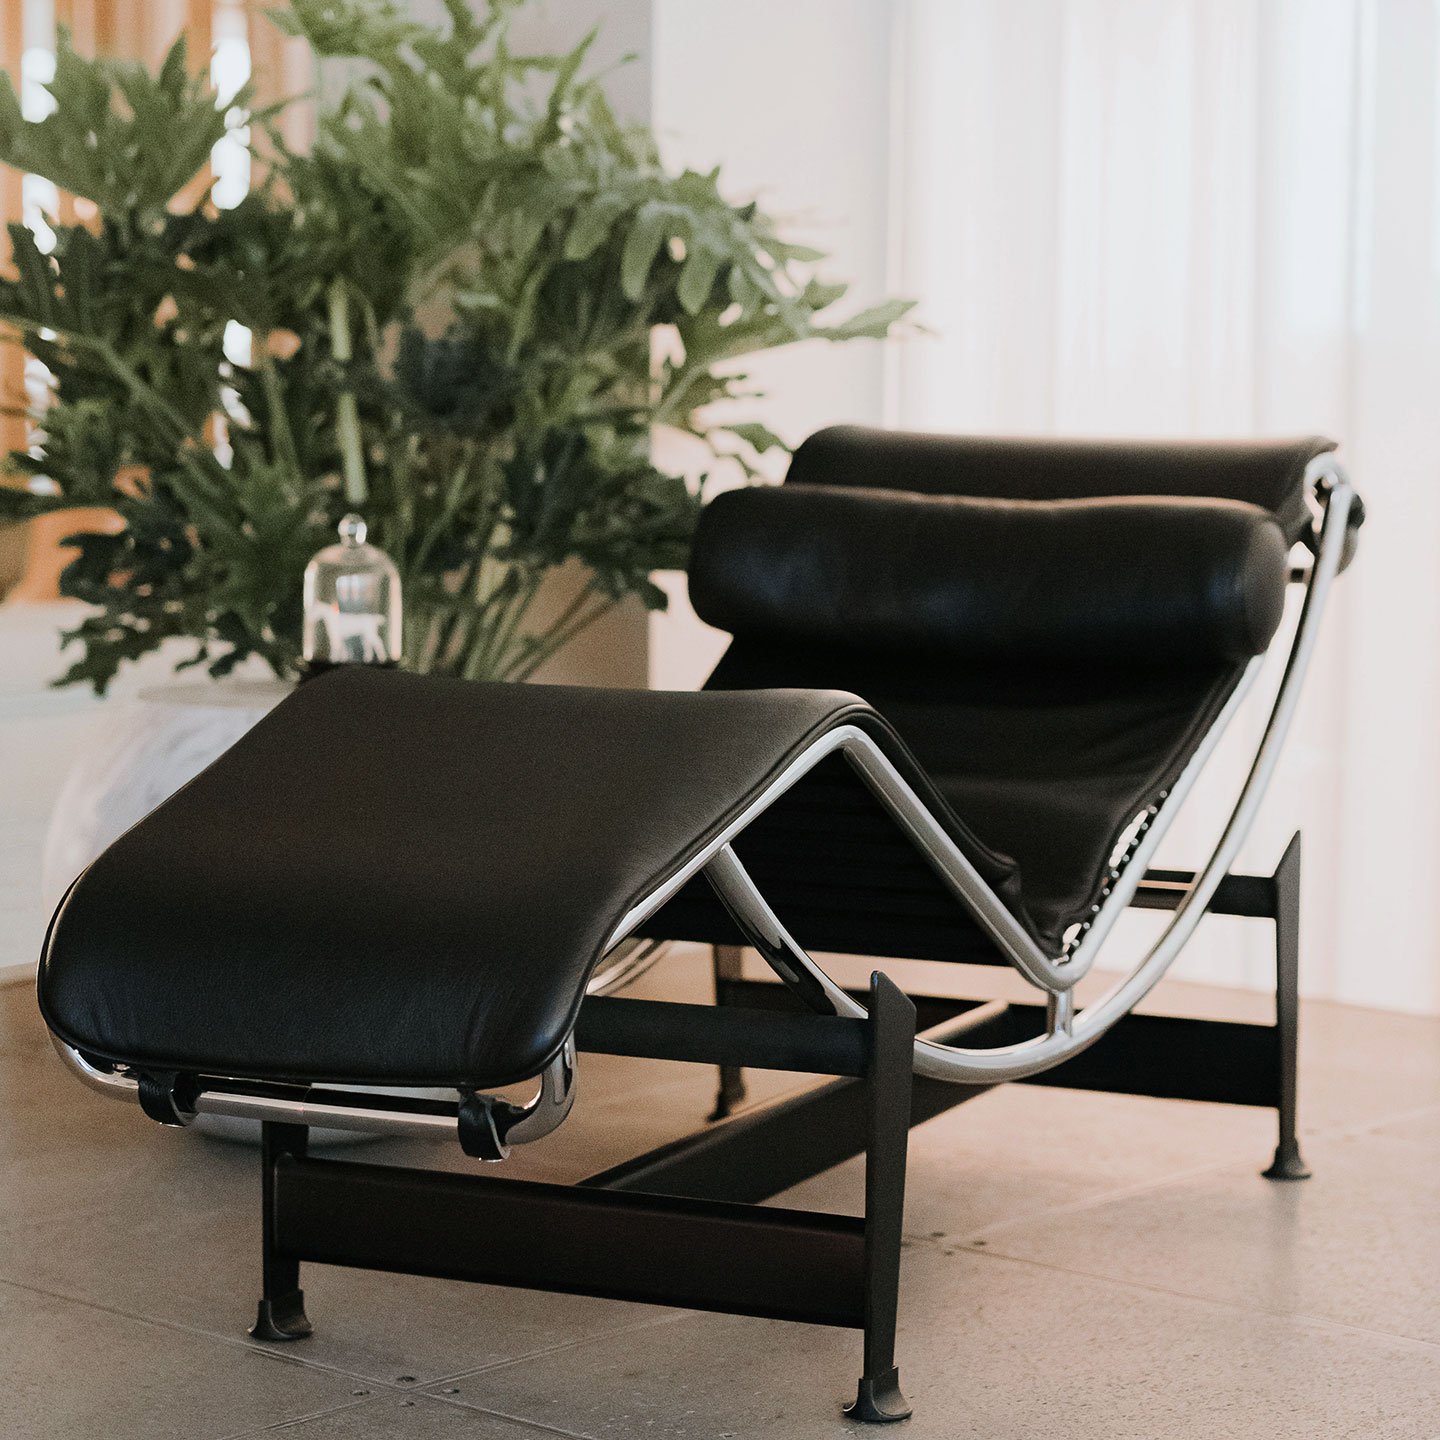 Haworth LC4 lounge chair in black leather in a living room